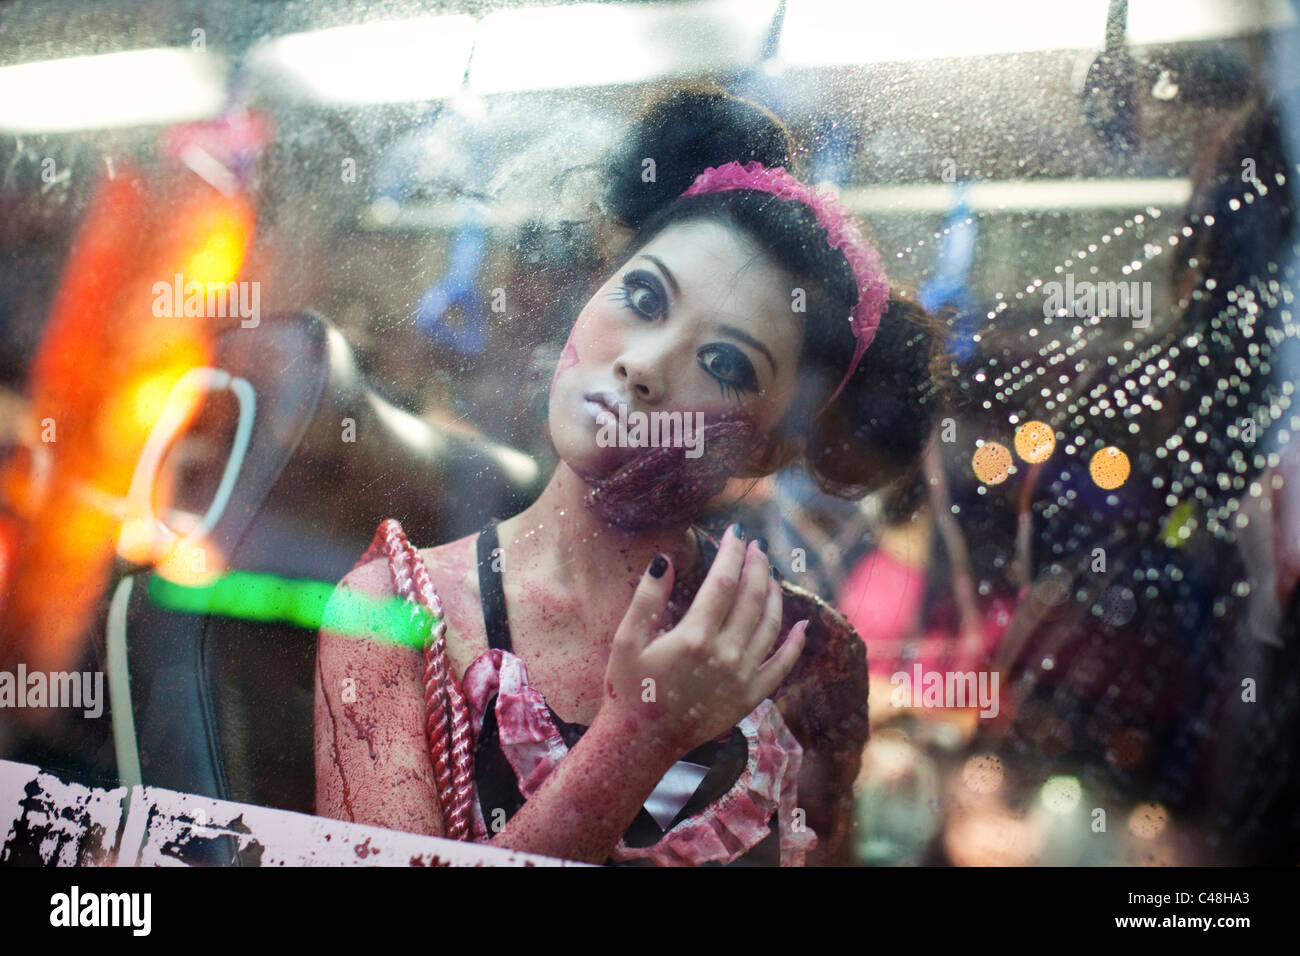 Zombie on the bus in Ximending, Taipei, Taiwan, October 30, 2010. Stock Photo